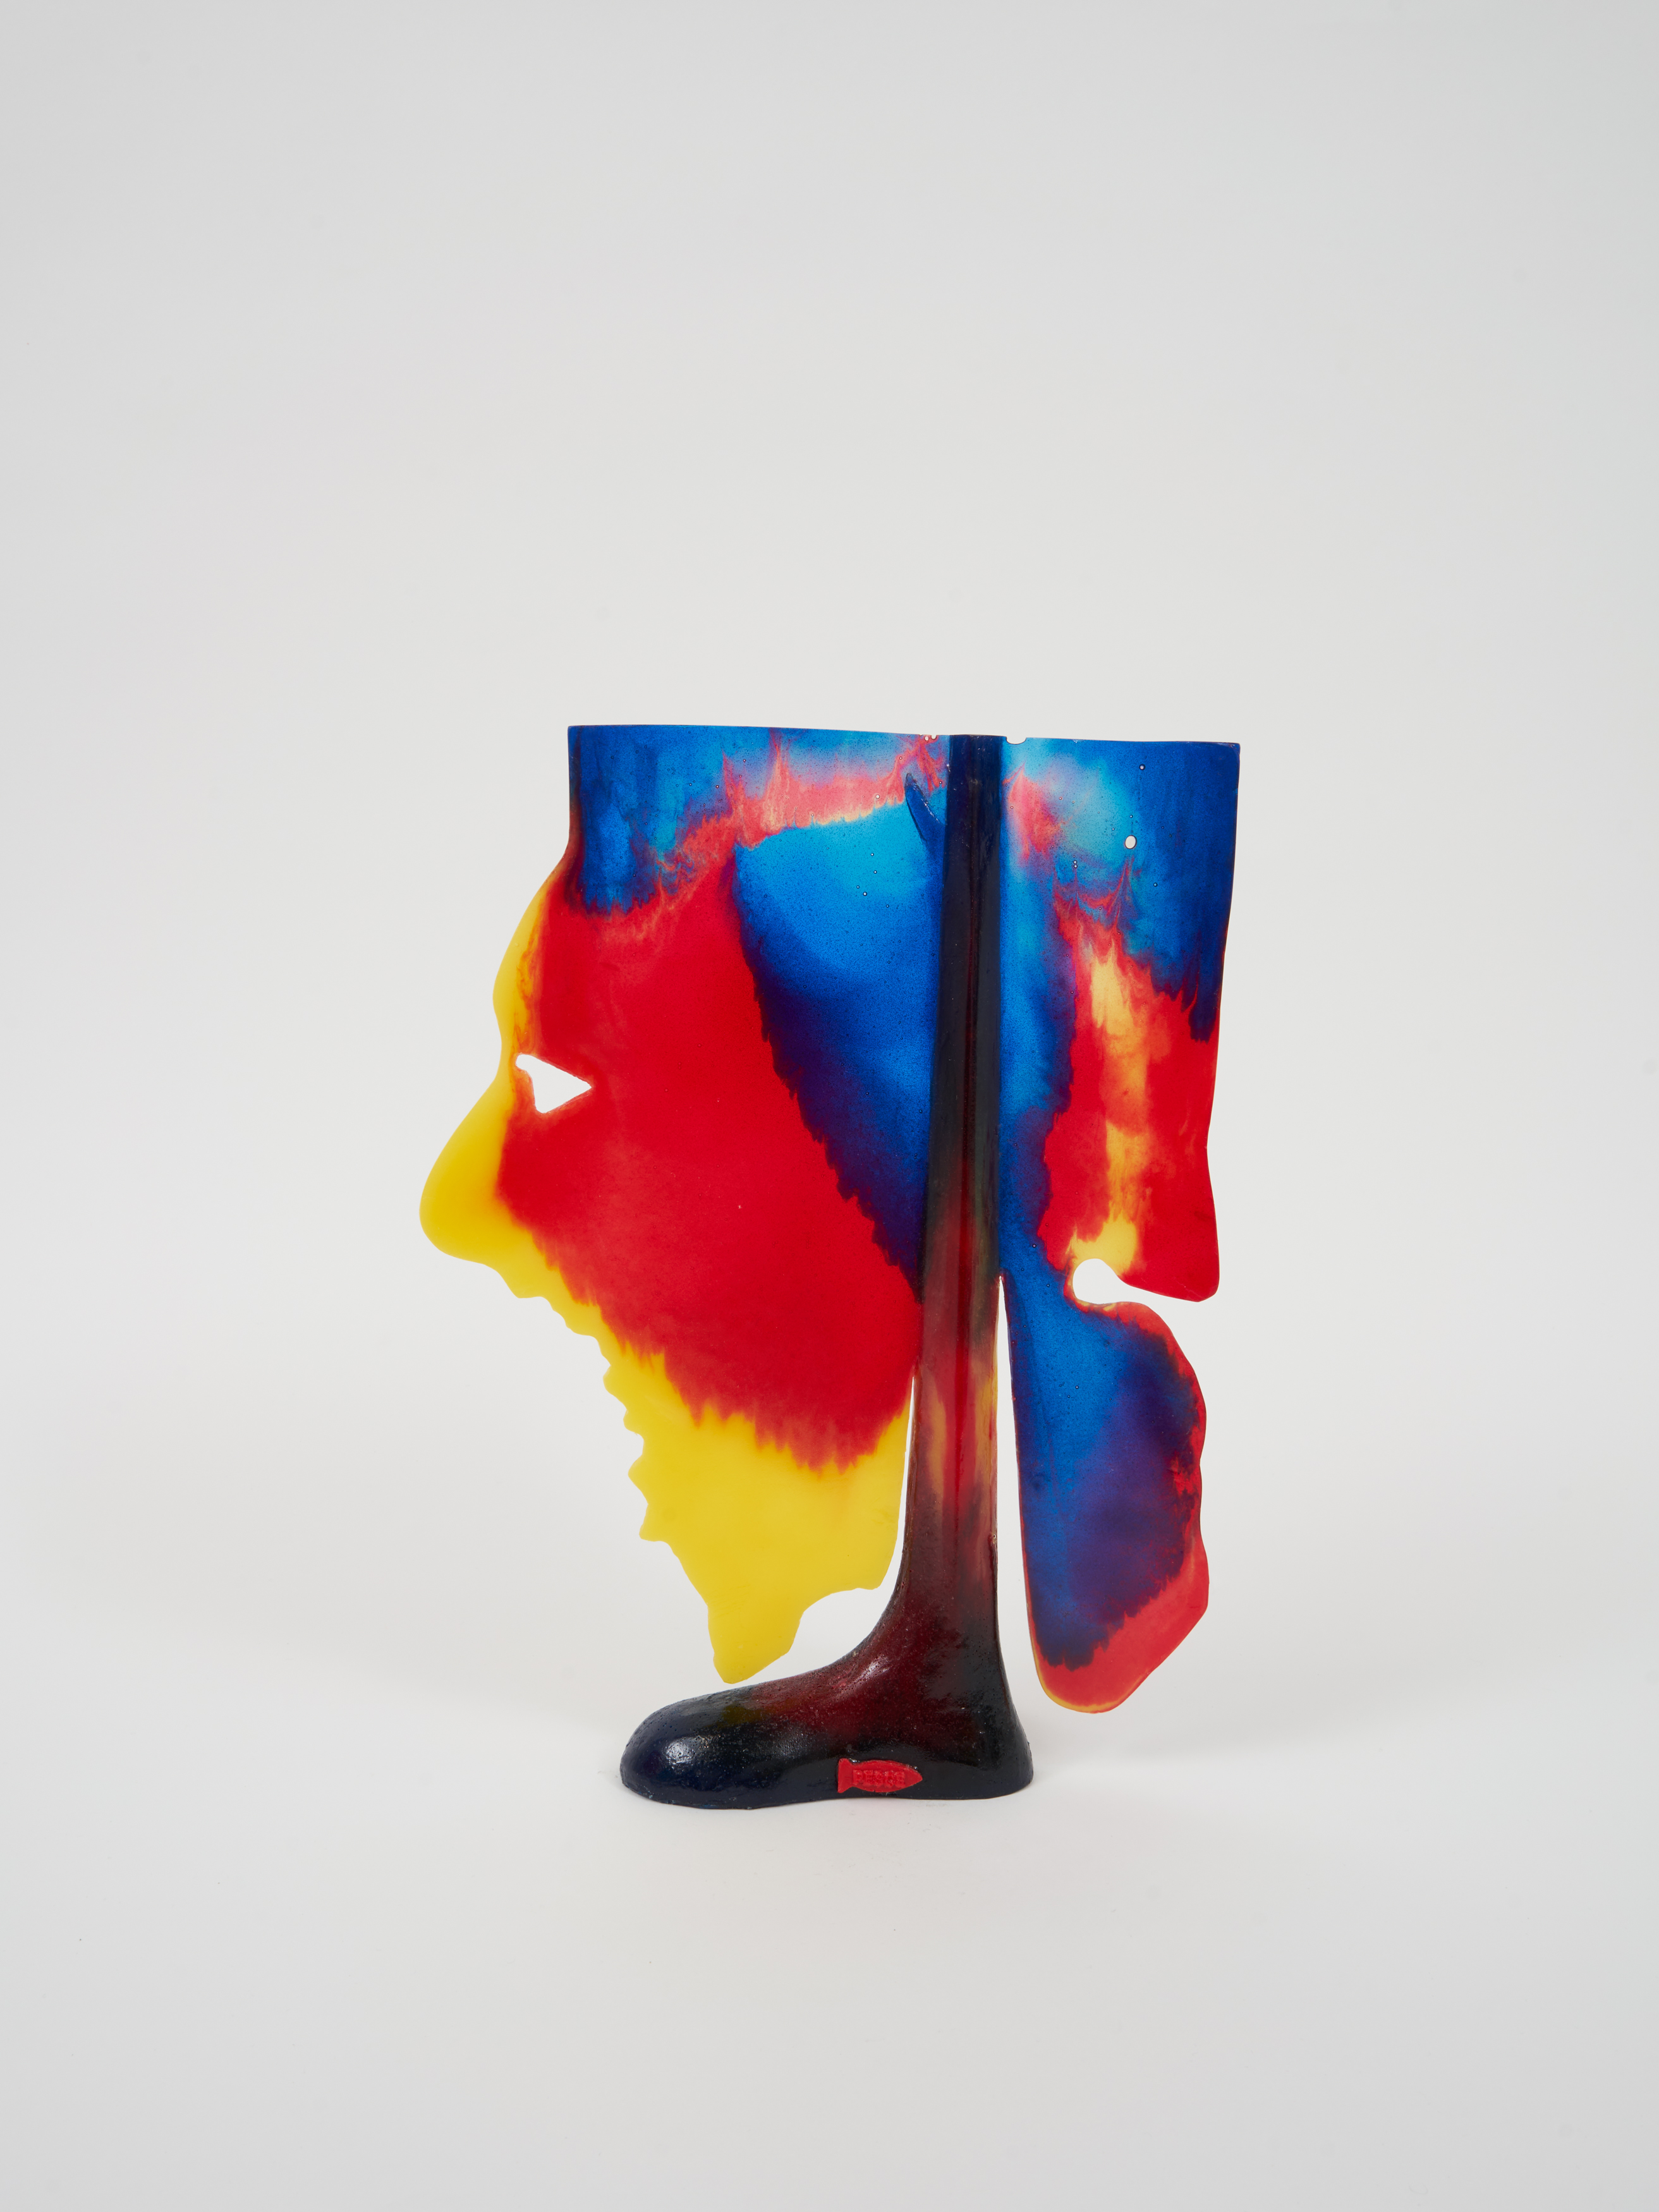 Gaetano Pesce Self Portrait (The Complete Incoherence), 2023 Resin 12